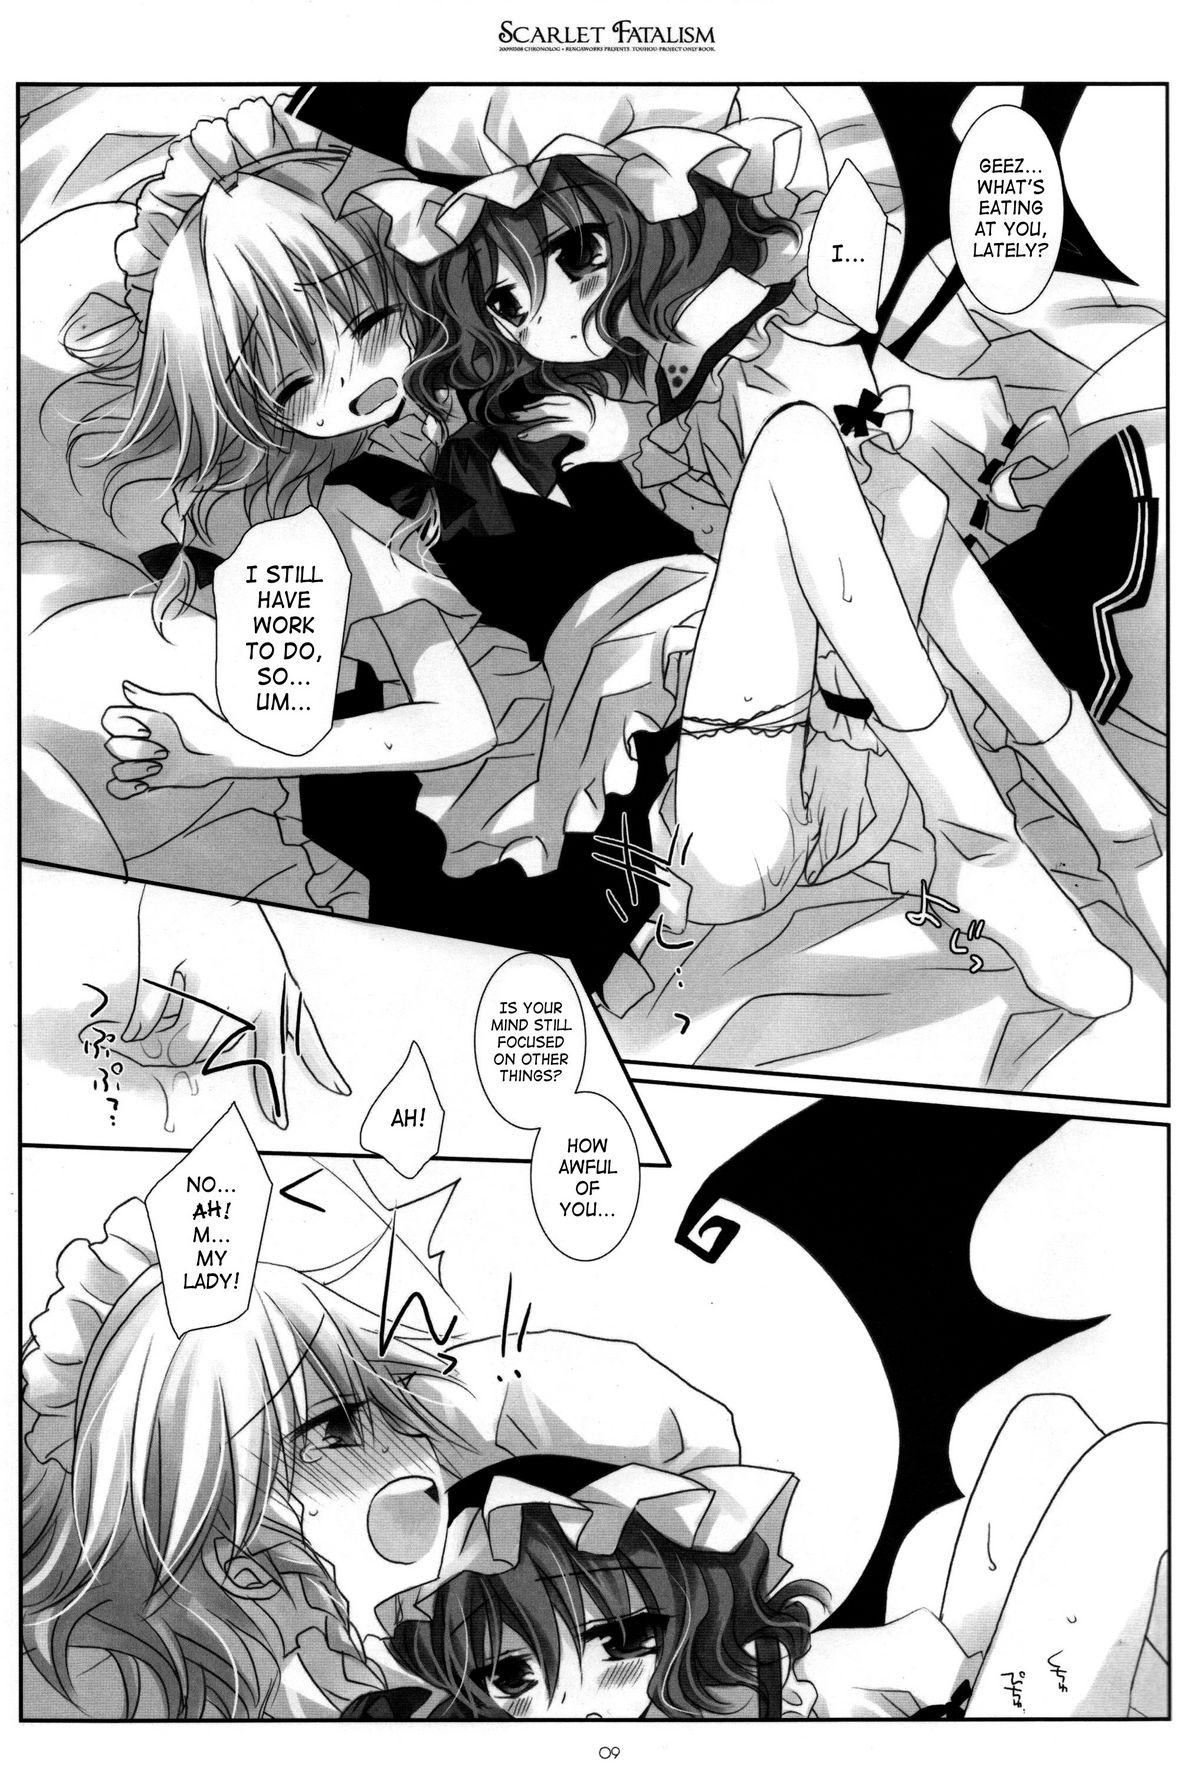 Squirting Scarlet Fatalism - Touhou project Matures - Page 8